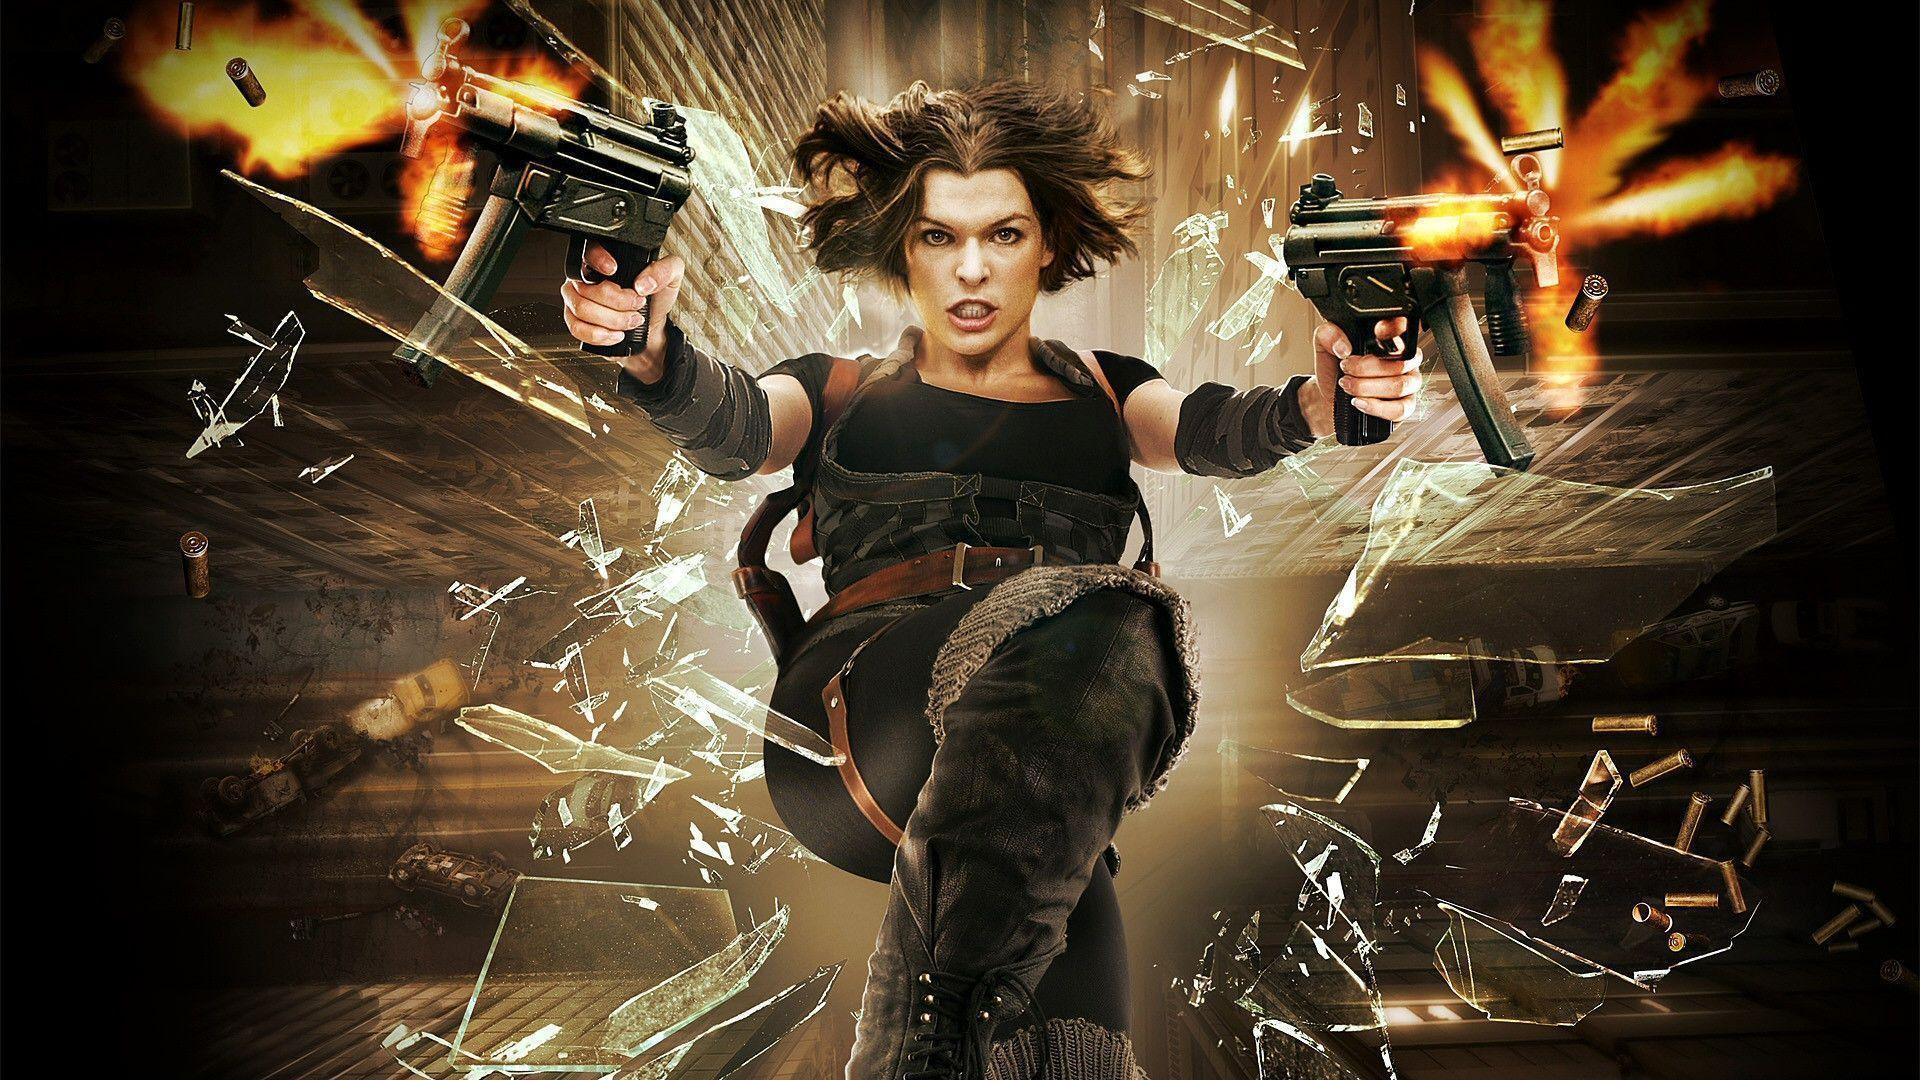 Resident Evil Movie Wallpapers - Wallpaper Cave